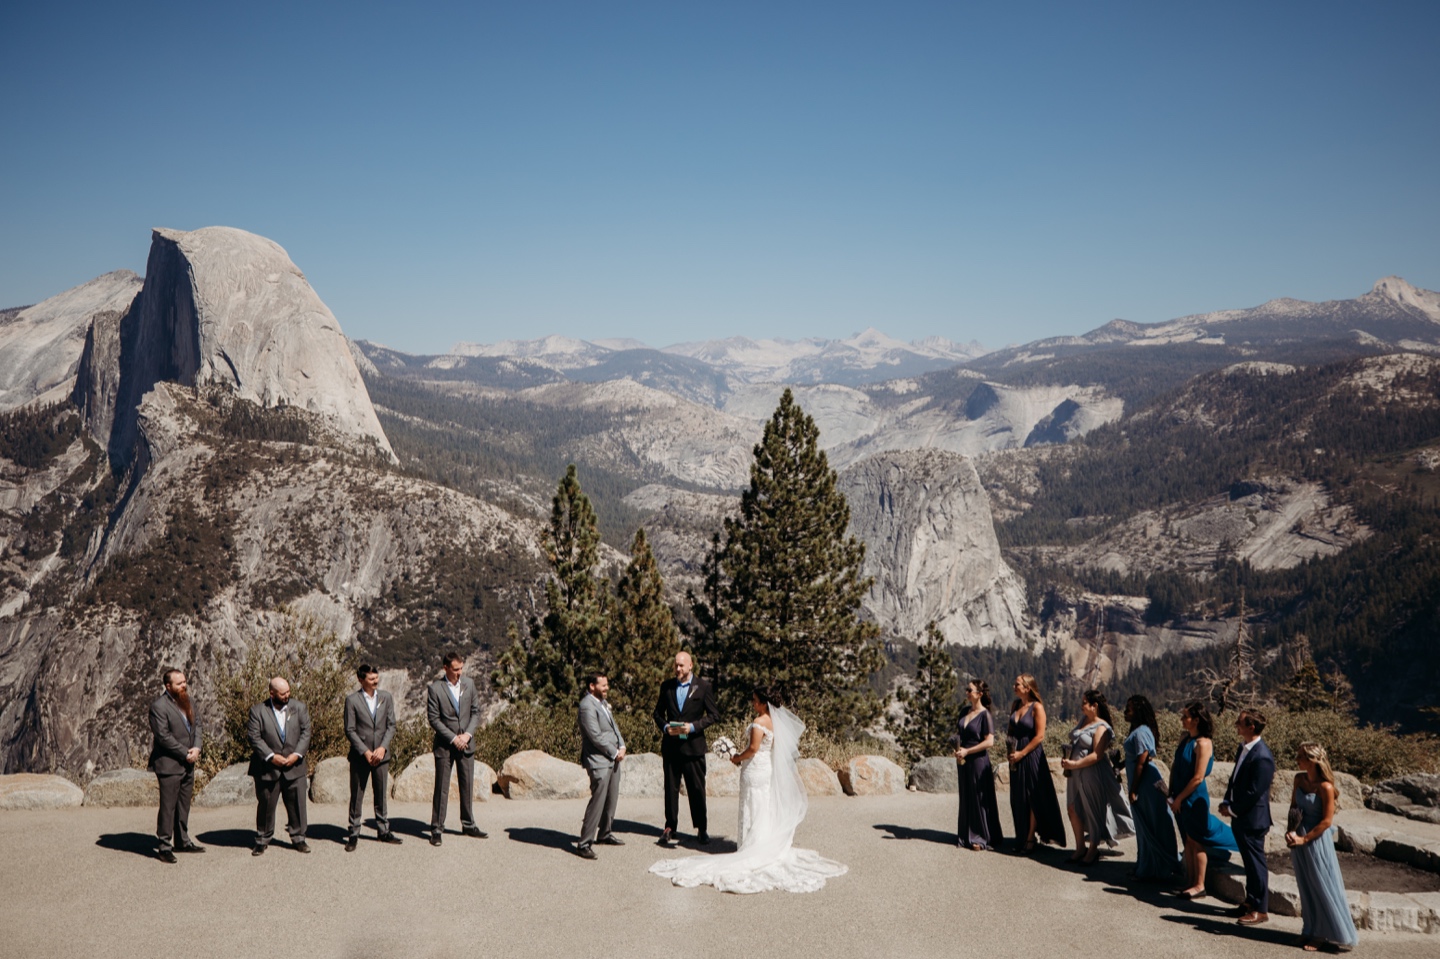 Entire wedding party as the bride and groom get married at Glacier Point in Yosemite National Park